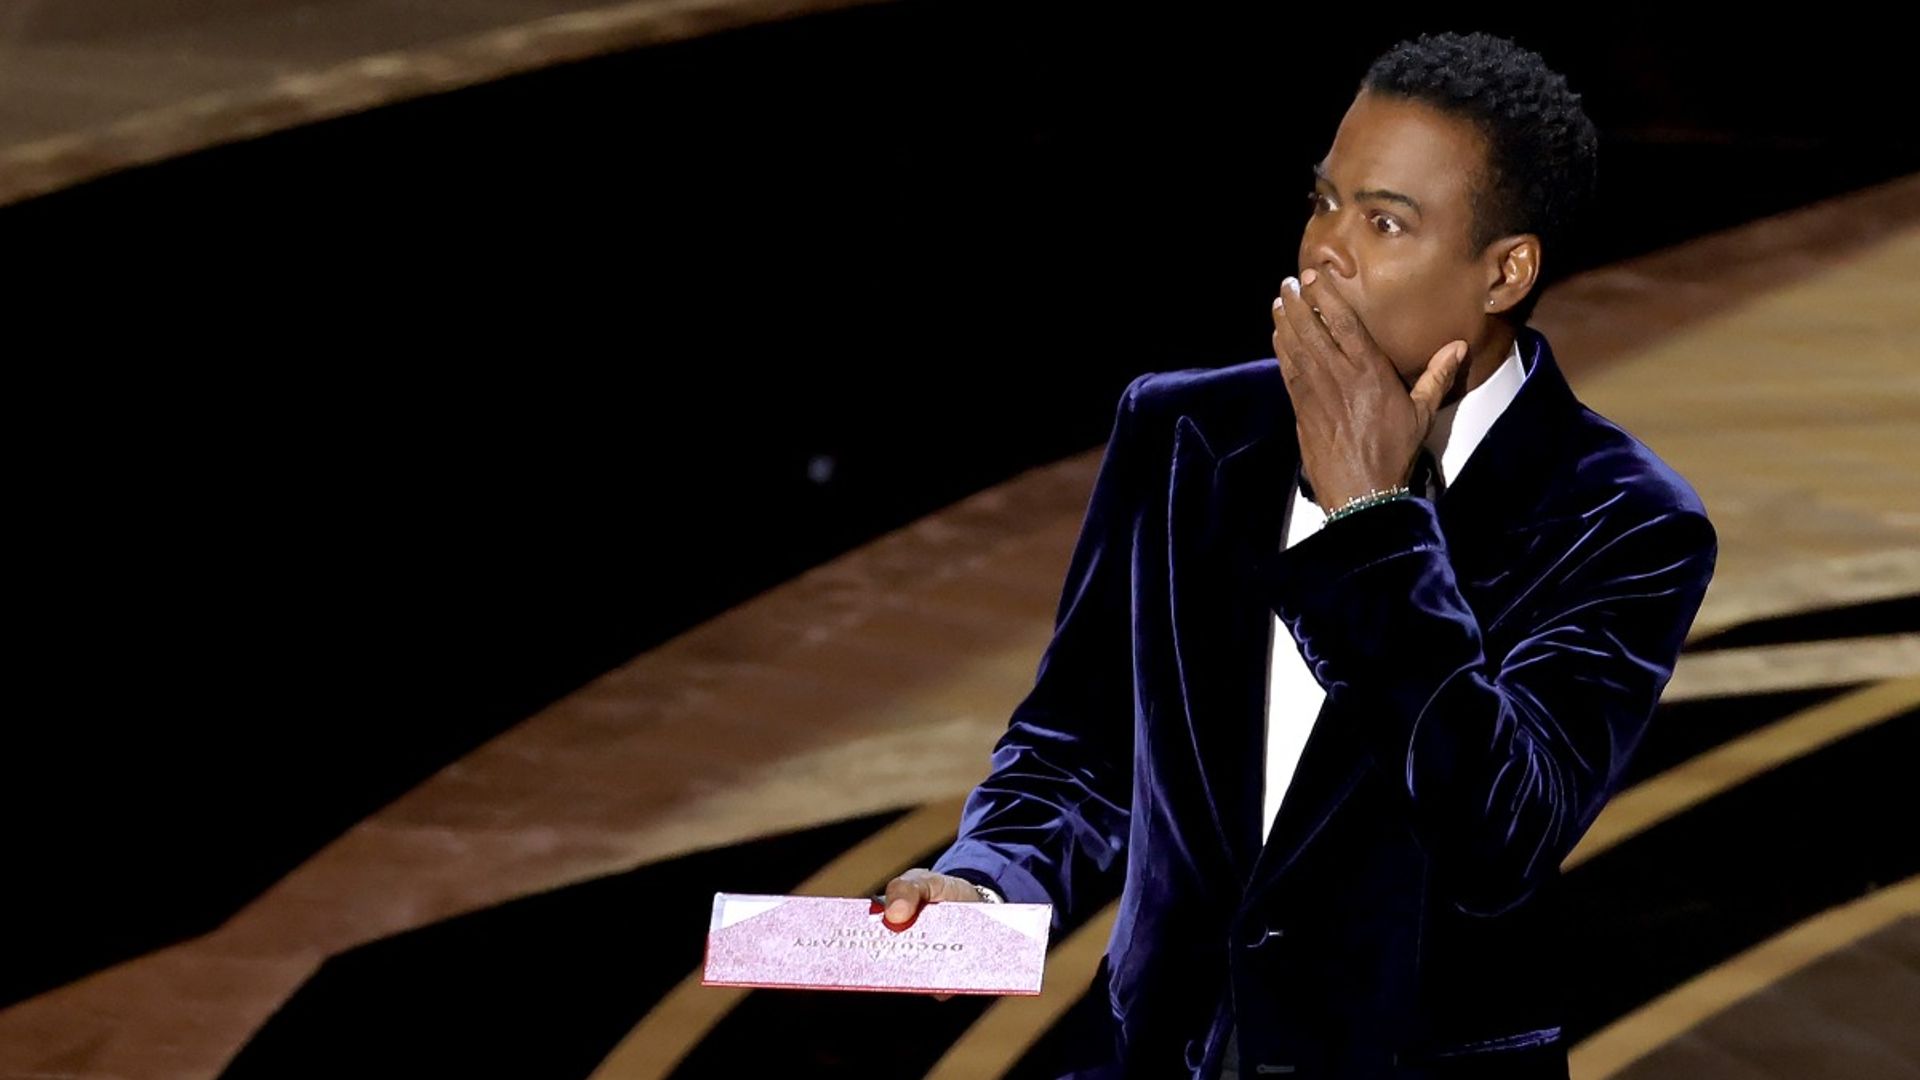 Chris Rock finally talks about Will Smith’s slap during stand-up show 